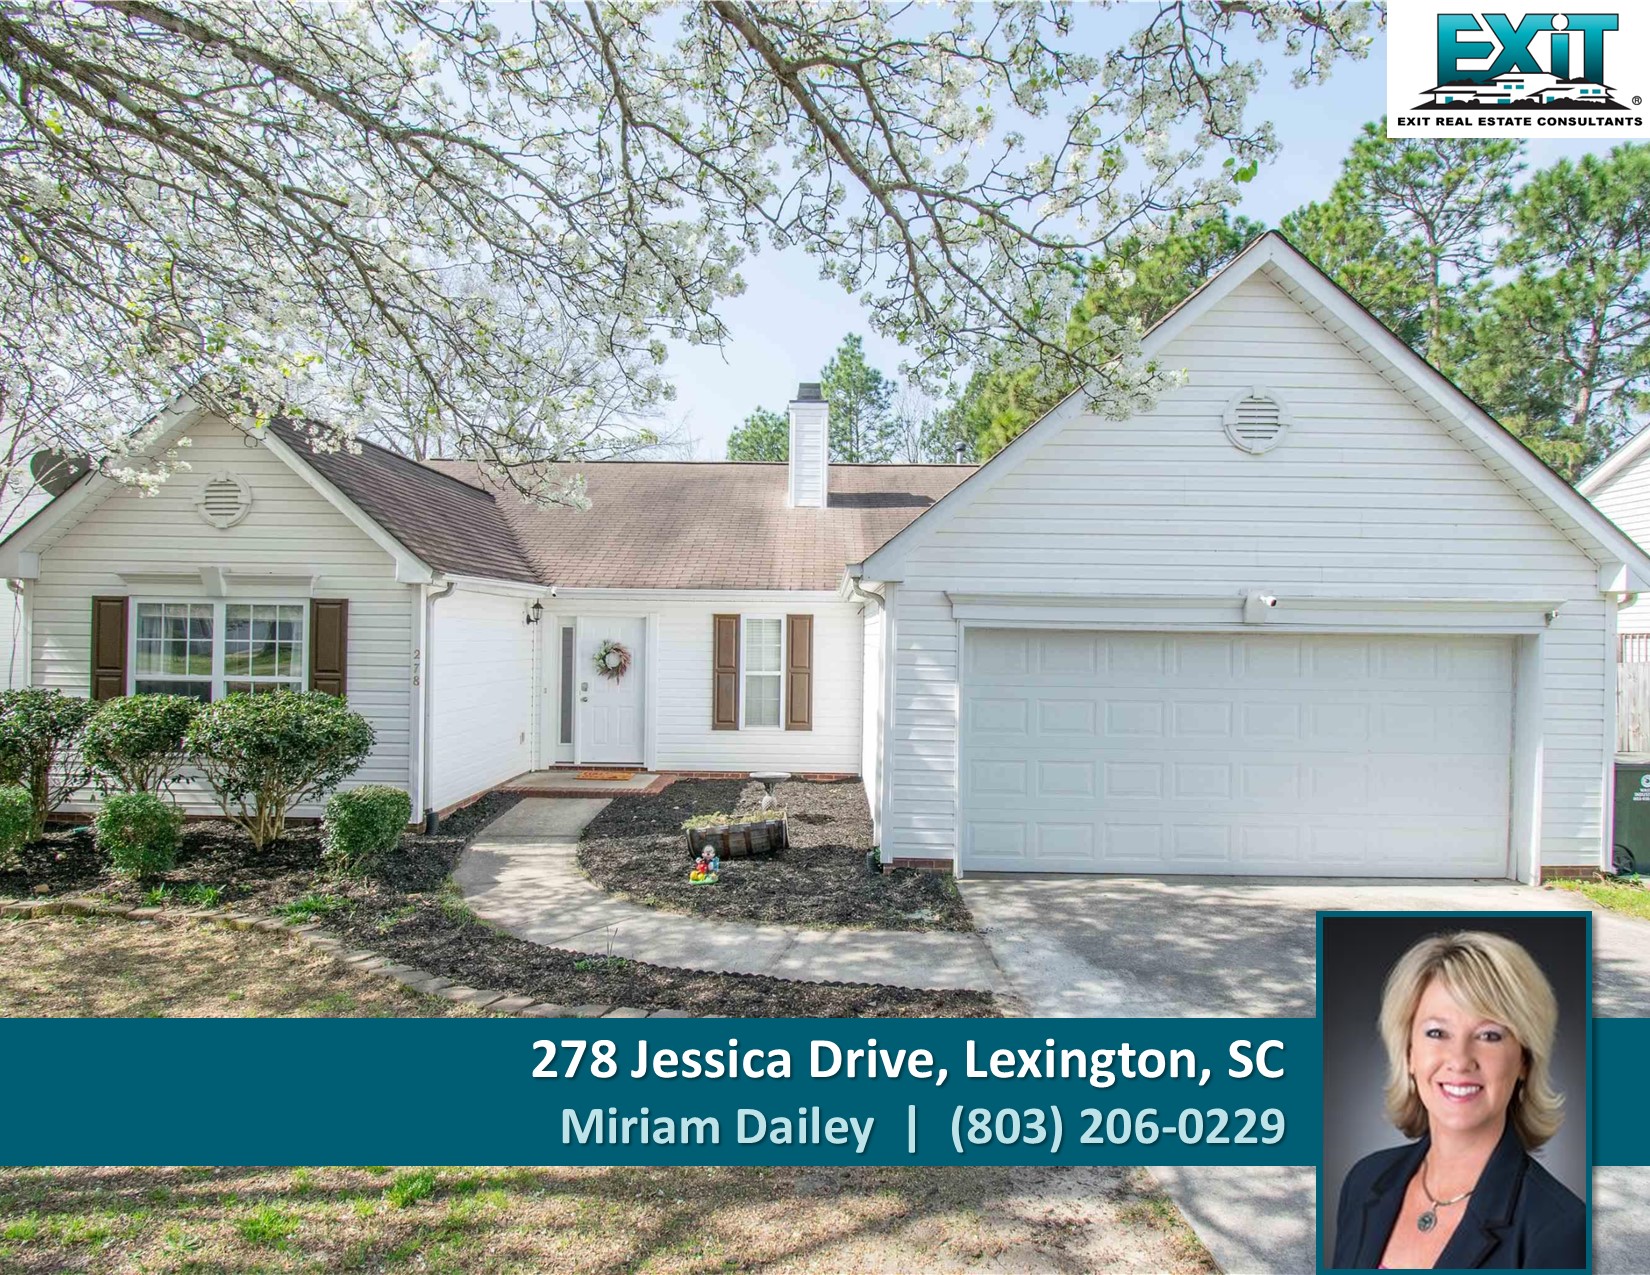 Just listed in White Knoll